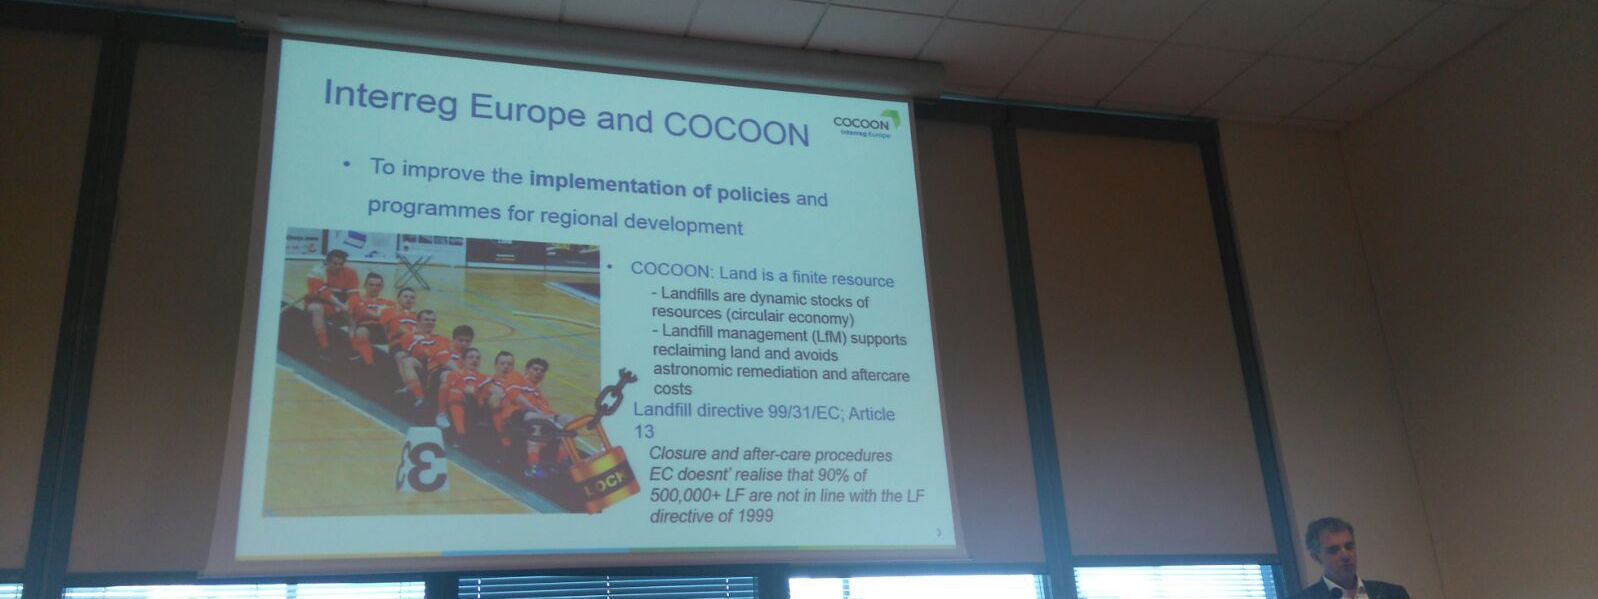 COCOON presented at AquaConsoil in Lyon, France